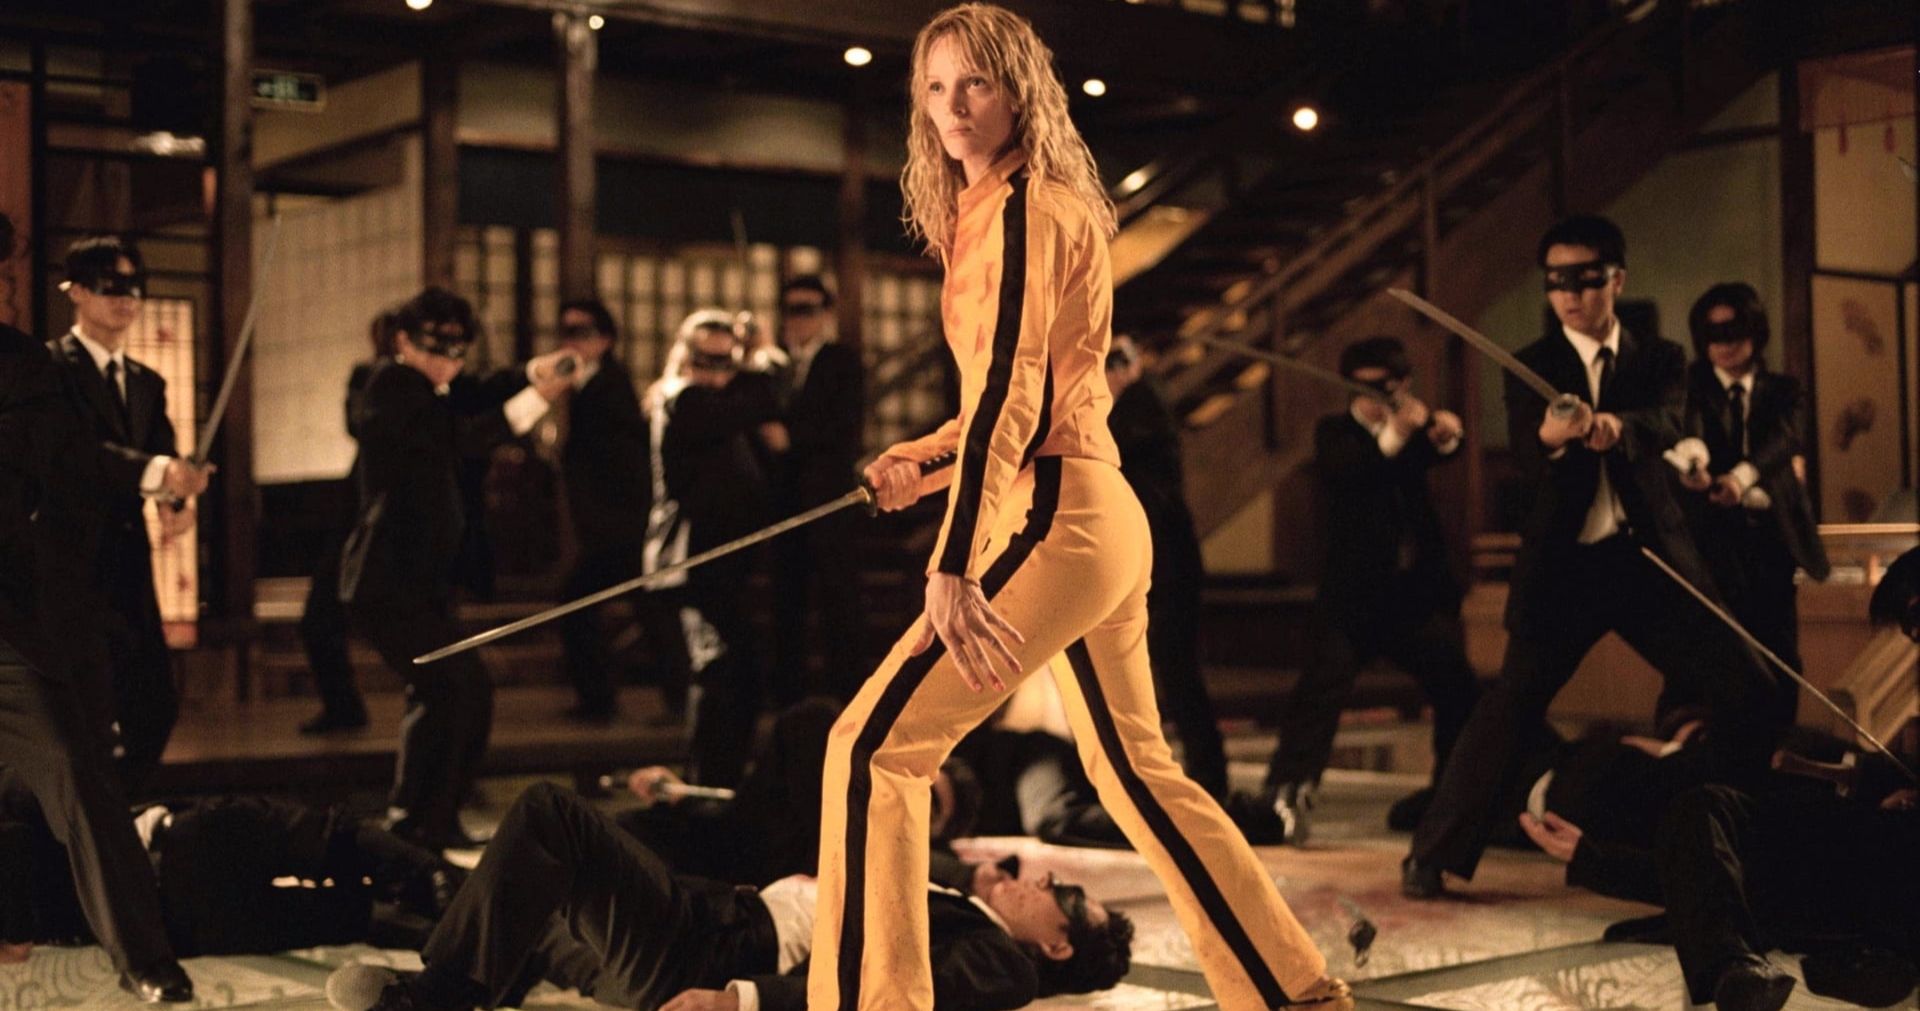 Is Kill Bill Two Movies or One? Tarantino Has the Final Answer